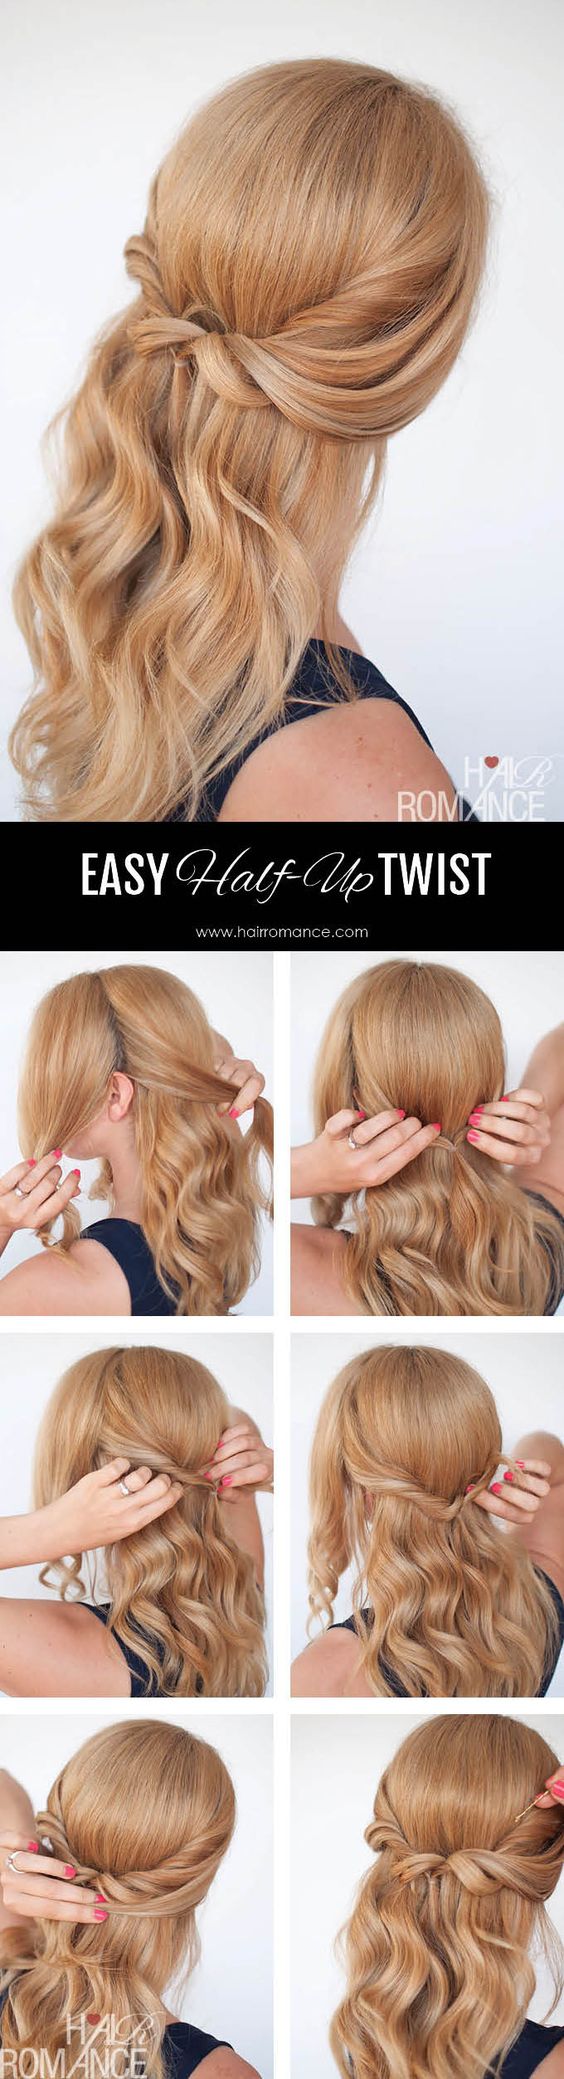 easy-half-up-hairstyle via